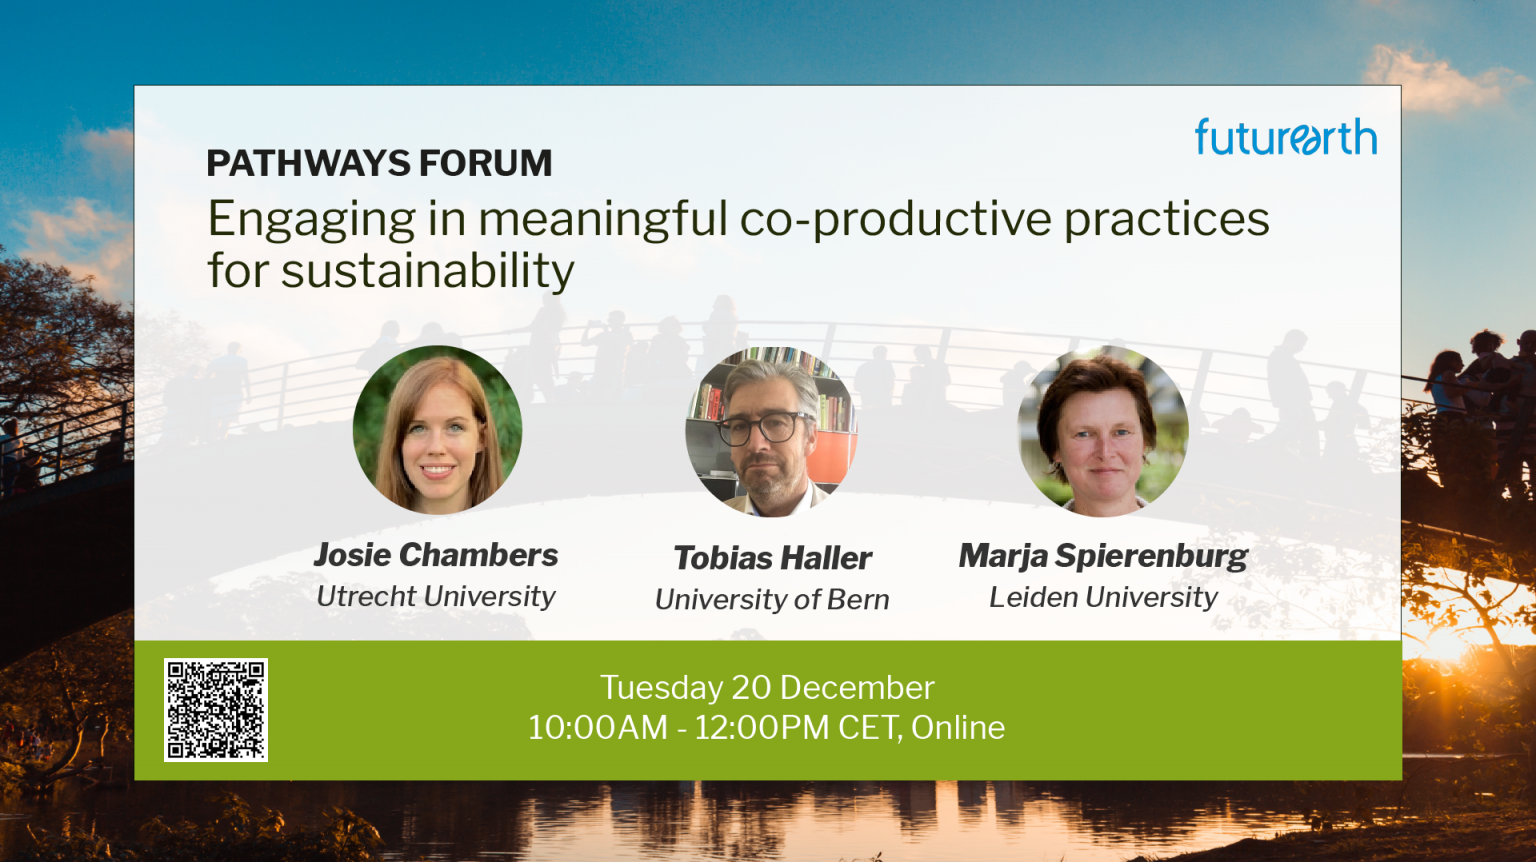 Pathways Forum: Engaging in meaningful co-productive practices for sustainability